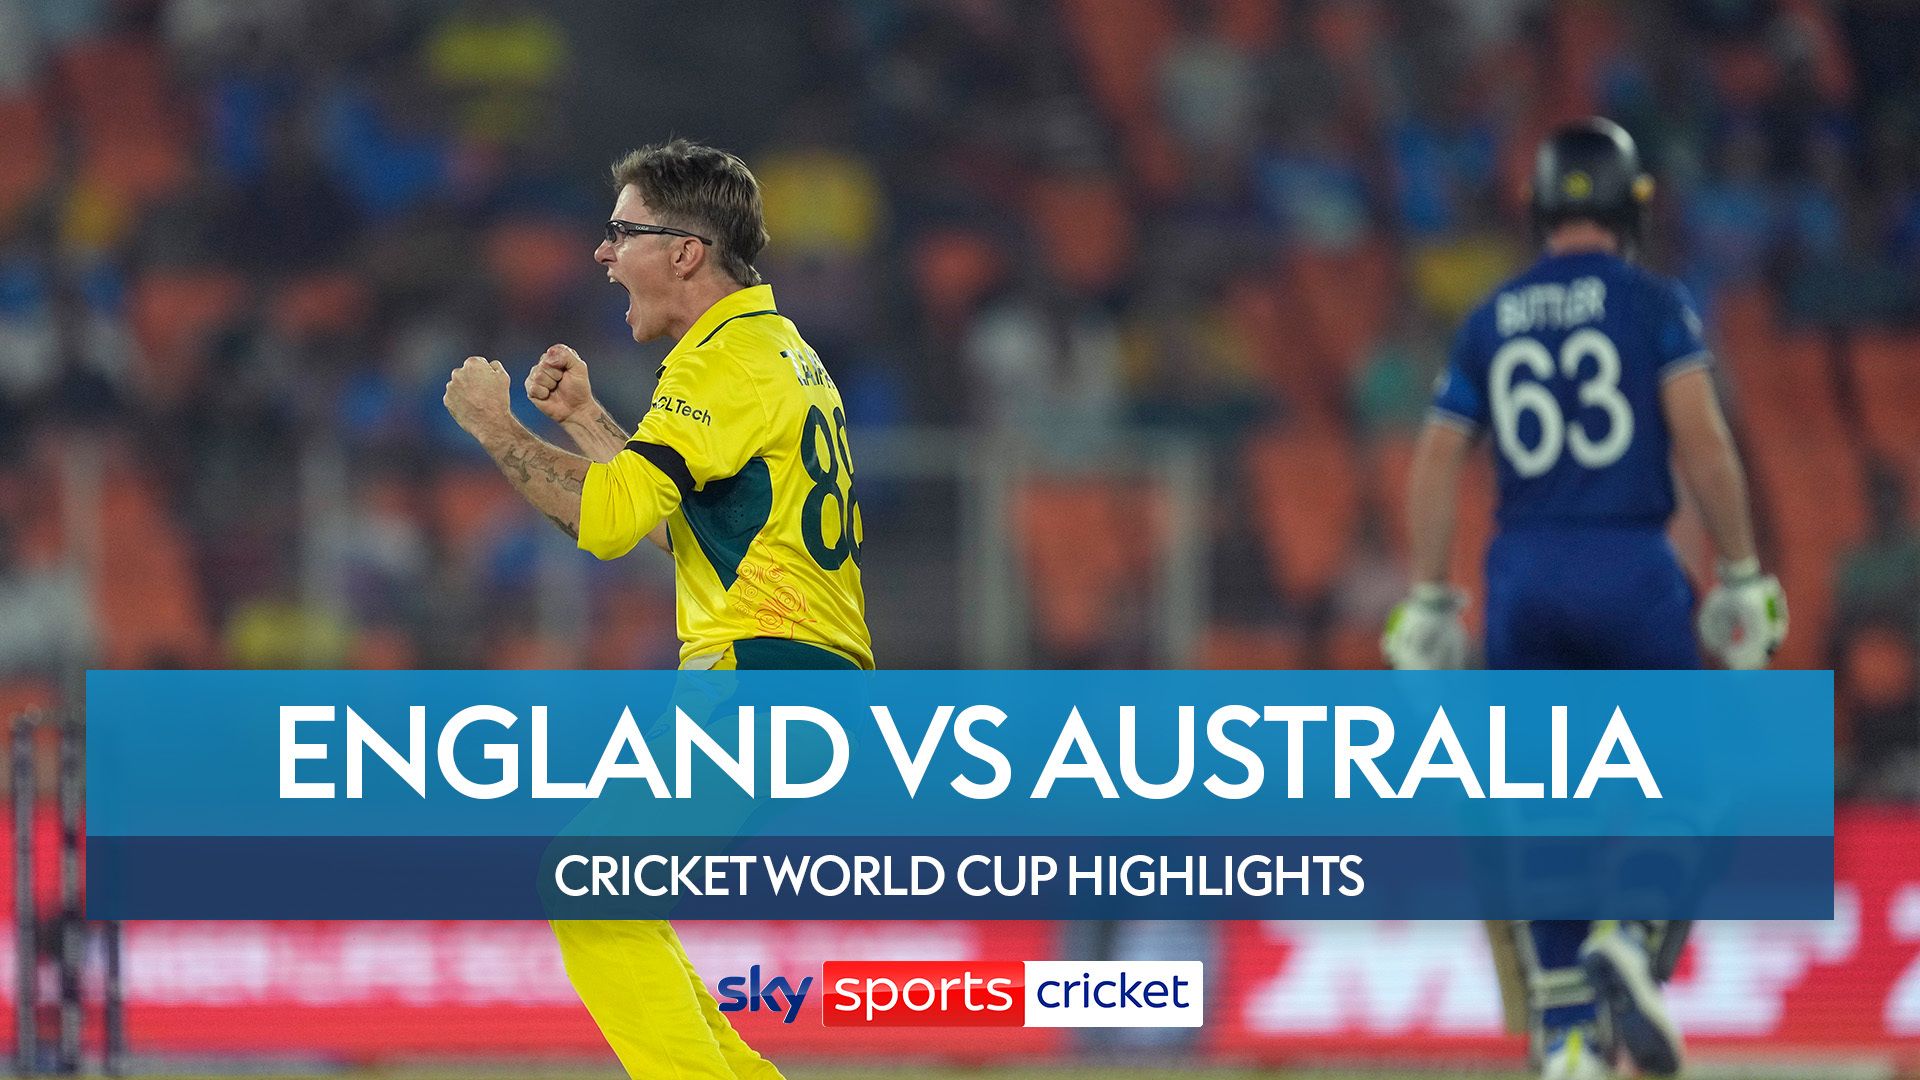 Full Highlights: Australia end England’s miserable World Cup defence